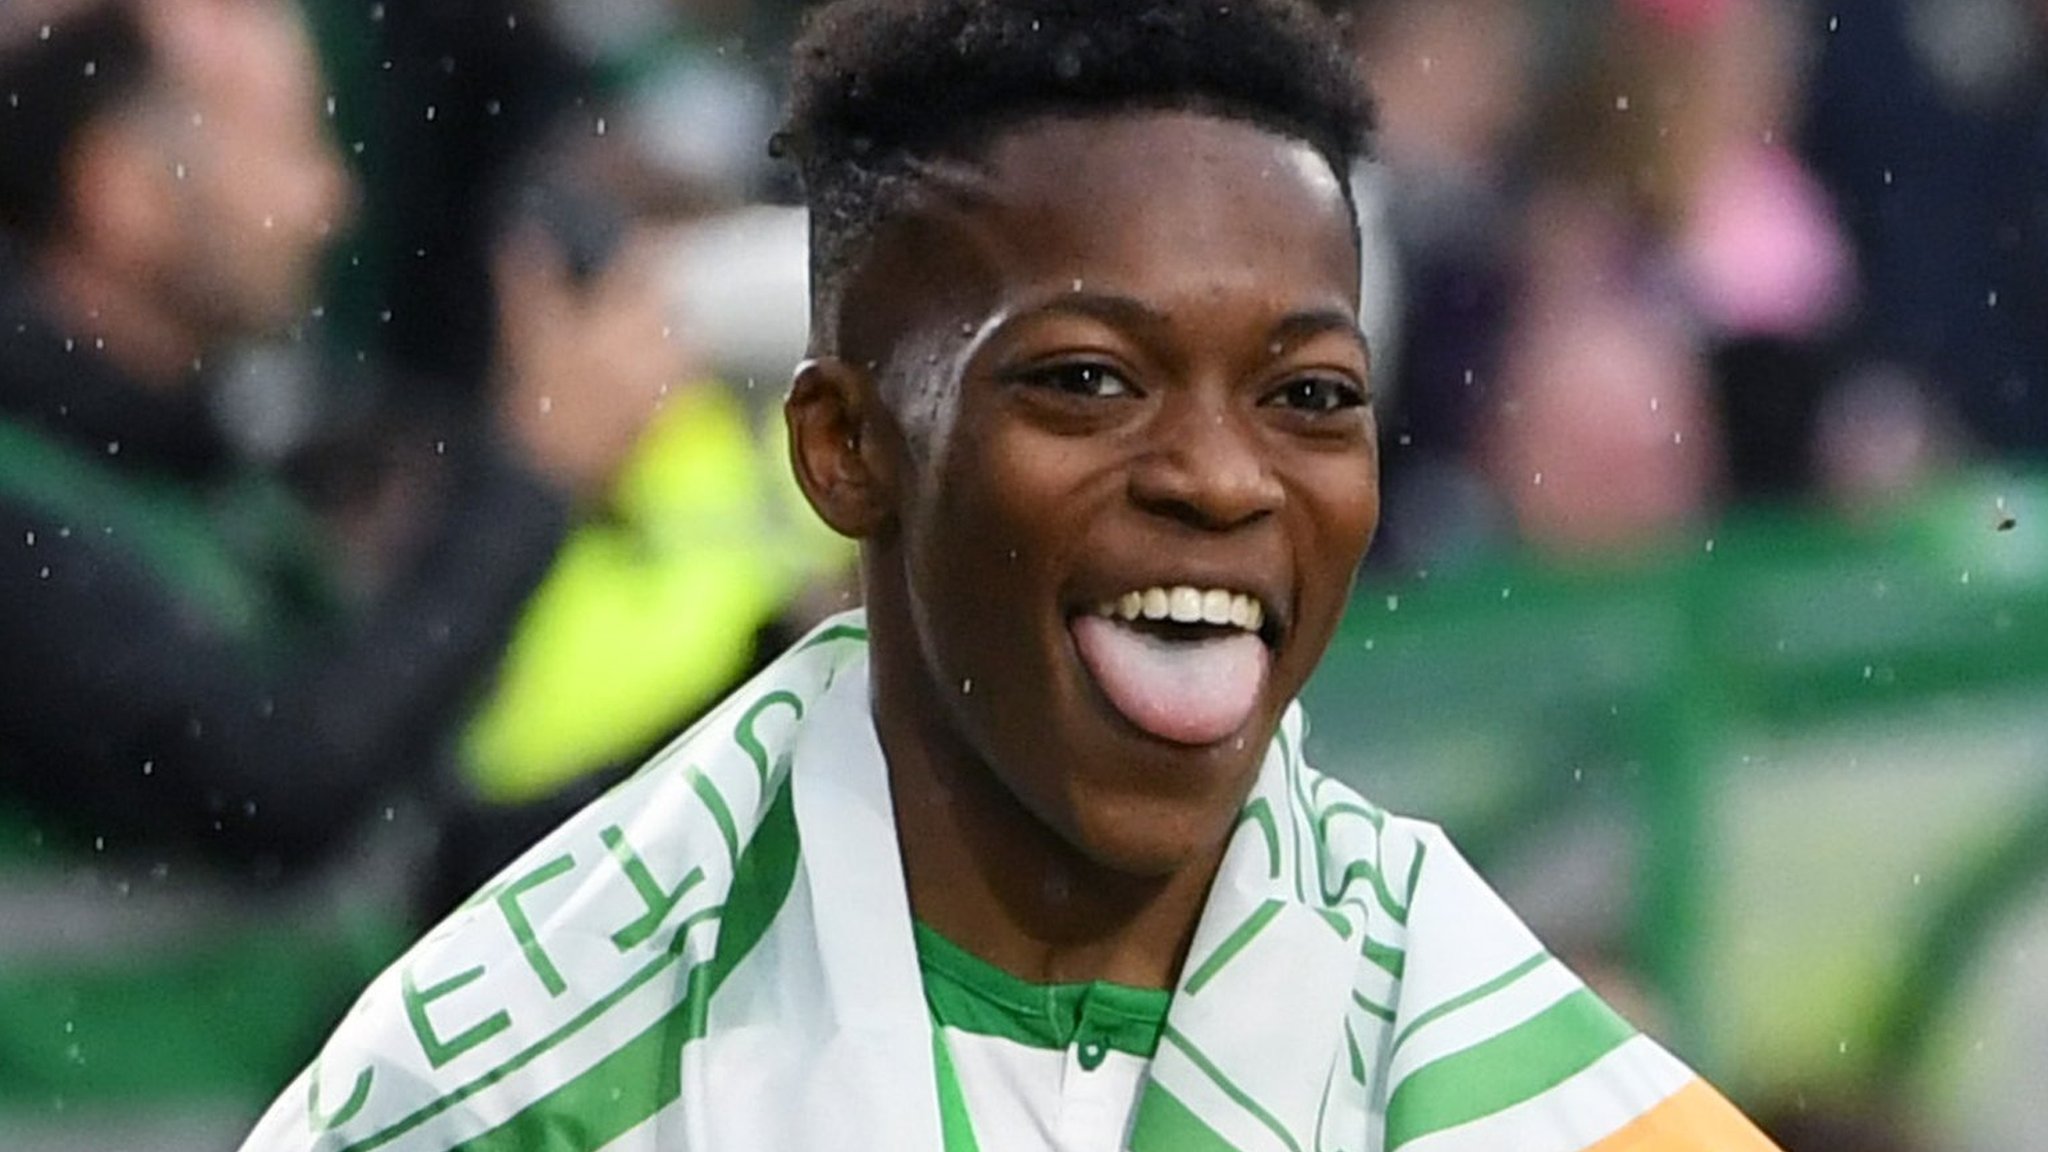 Celtic FC's Karamoko Dembele: 10 of the world's youngest sports stars